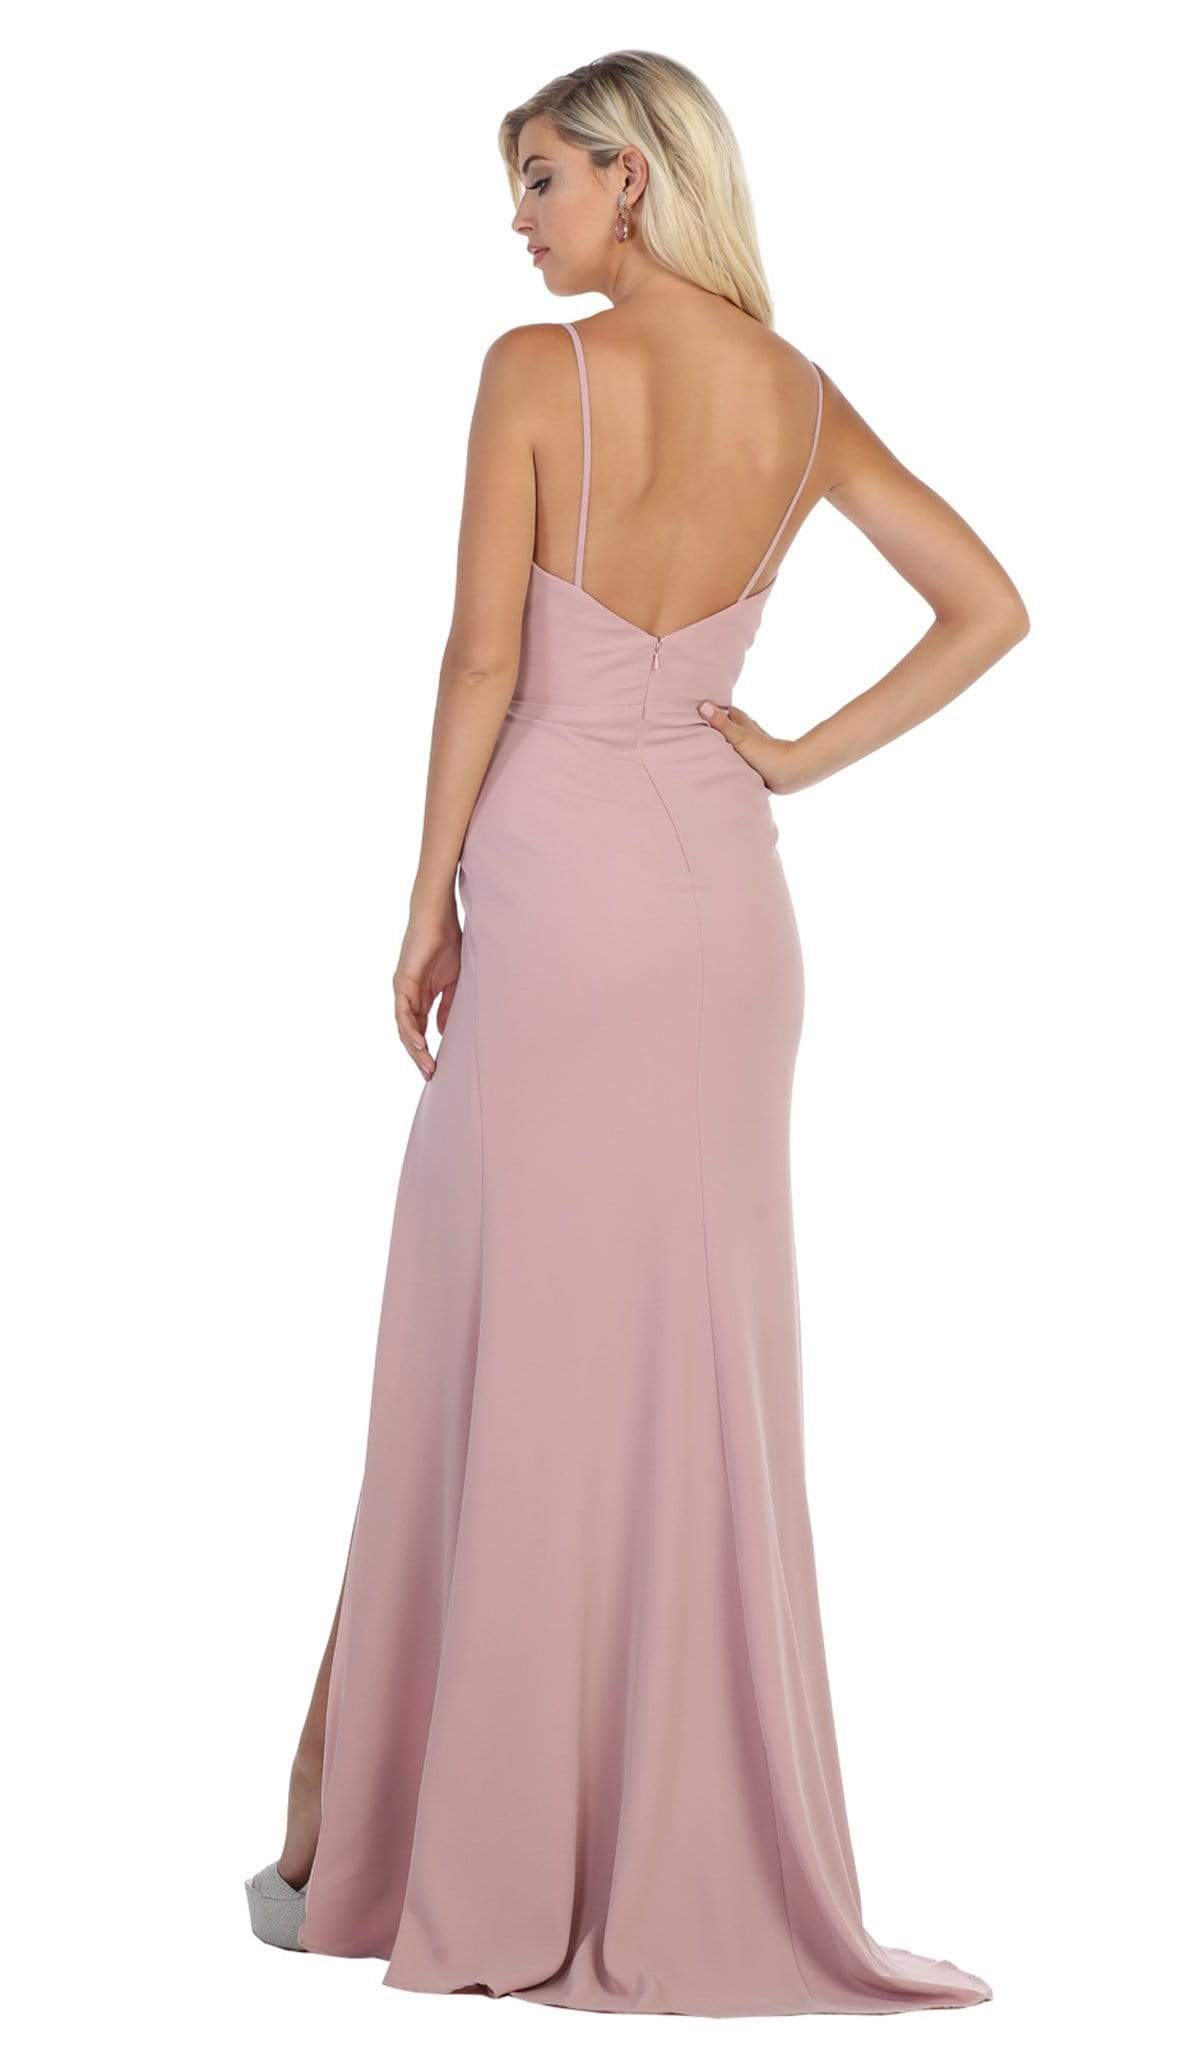 May Queen - MQ1666 Draping Surplice Bodice High Slit Gown Bridesmaid Dresses